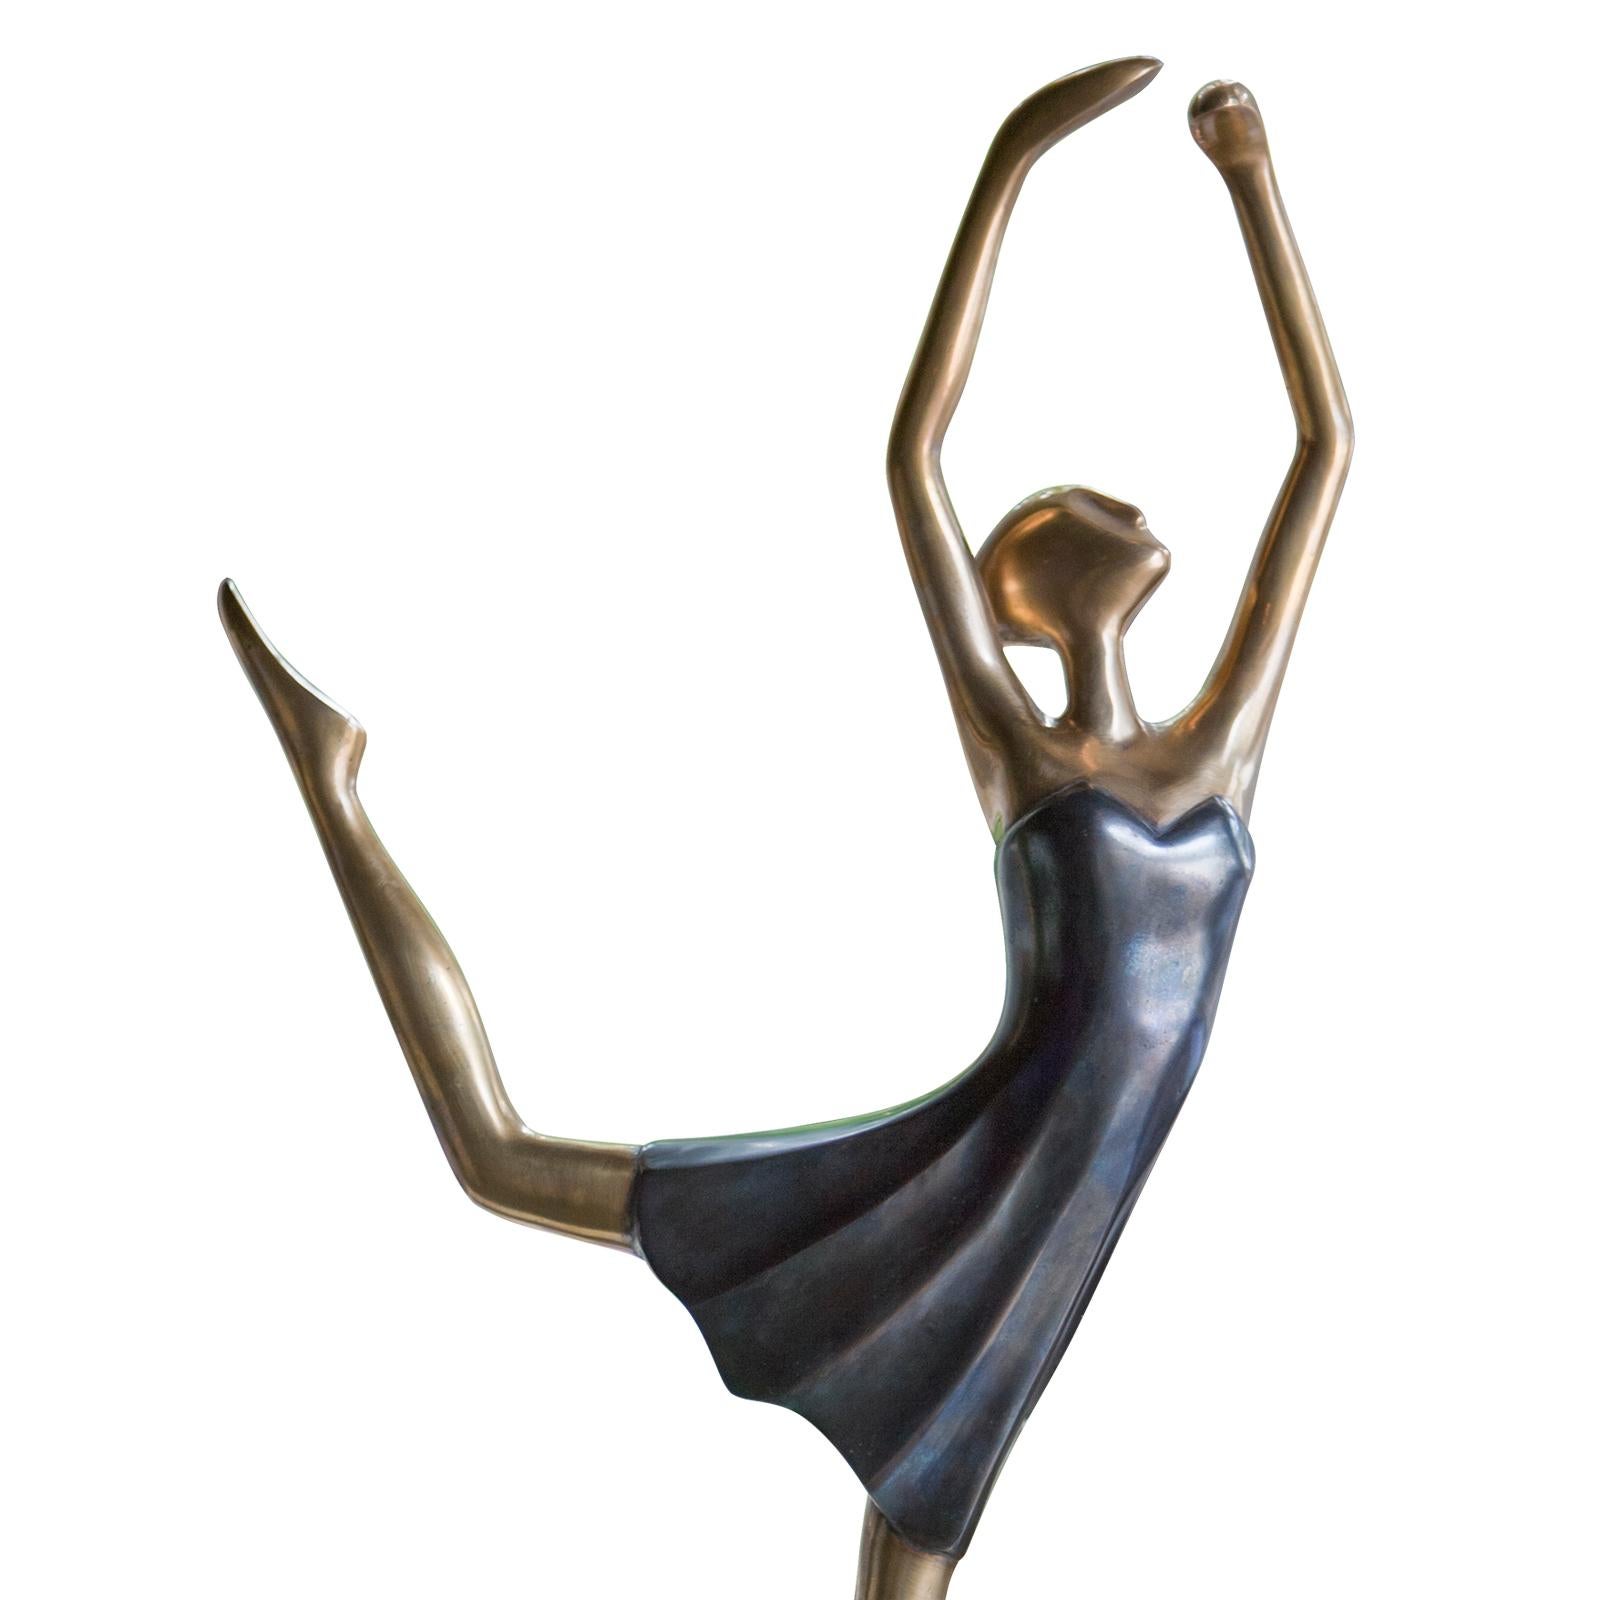 Sculpture star dancer all in casted brass.
On casted brass base. With blue dress.